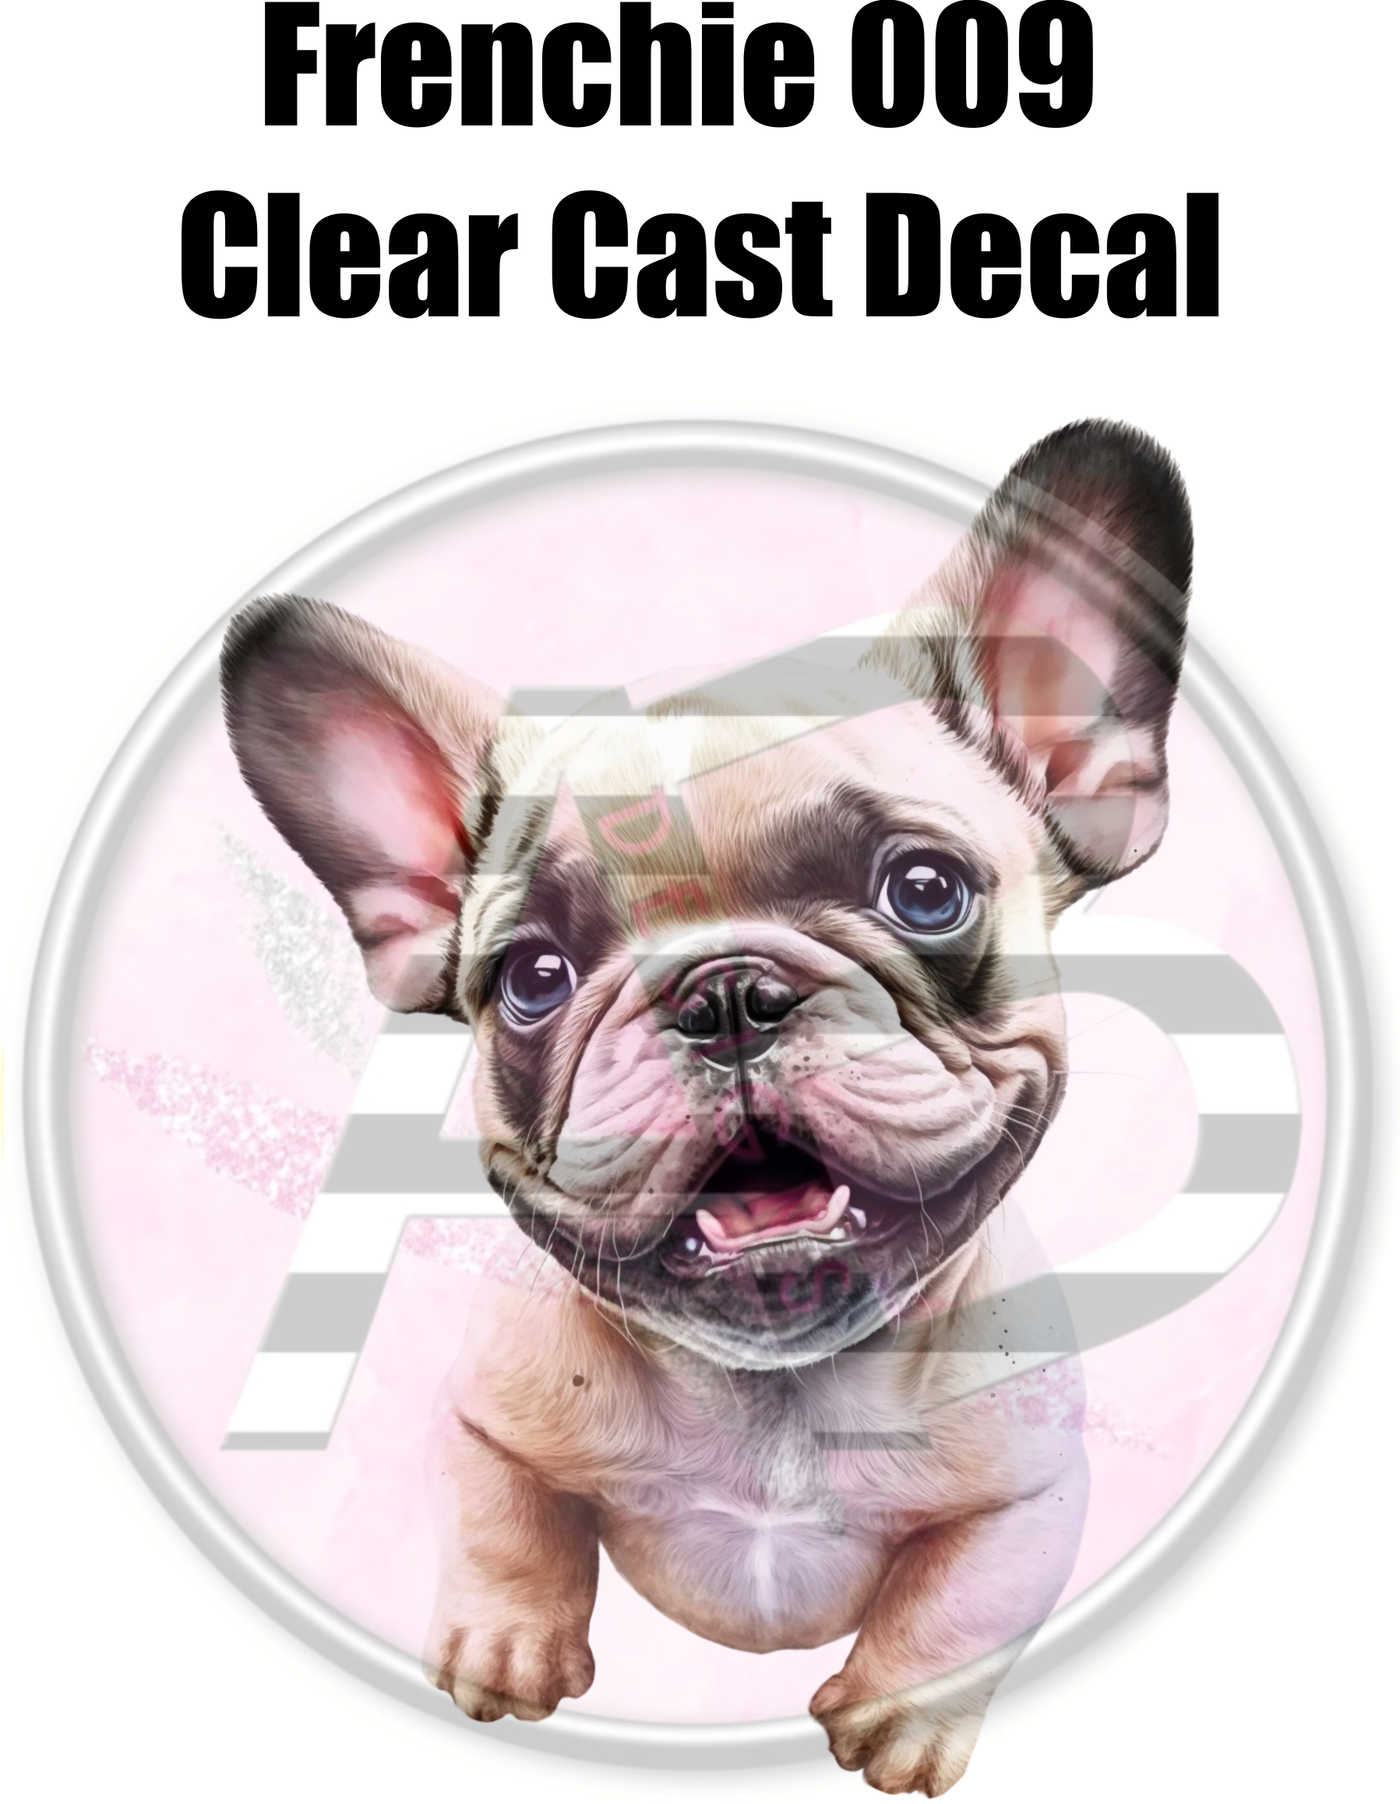 Frenchie 009 - Clear Cast Decal